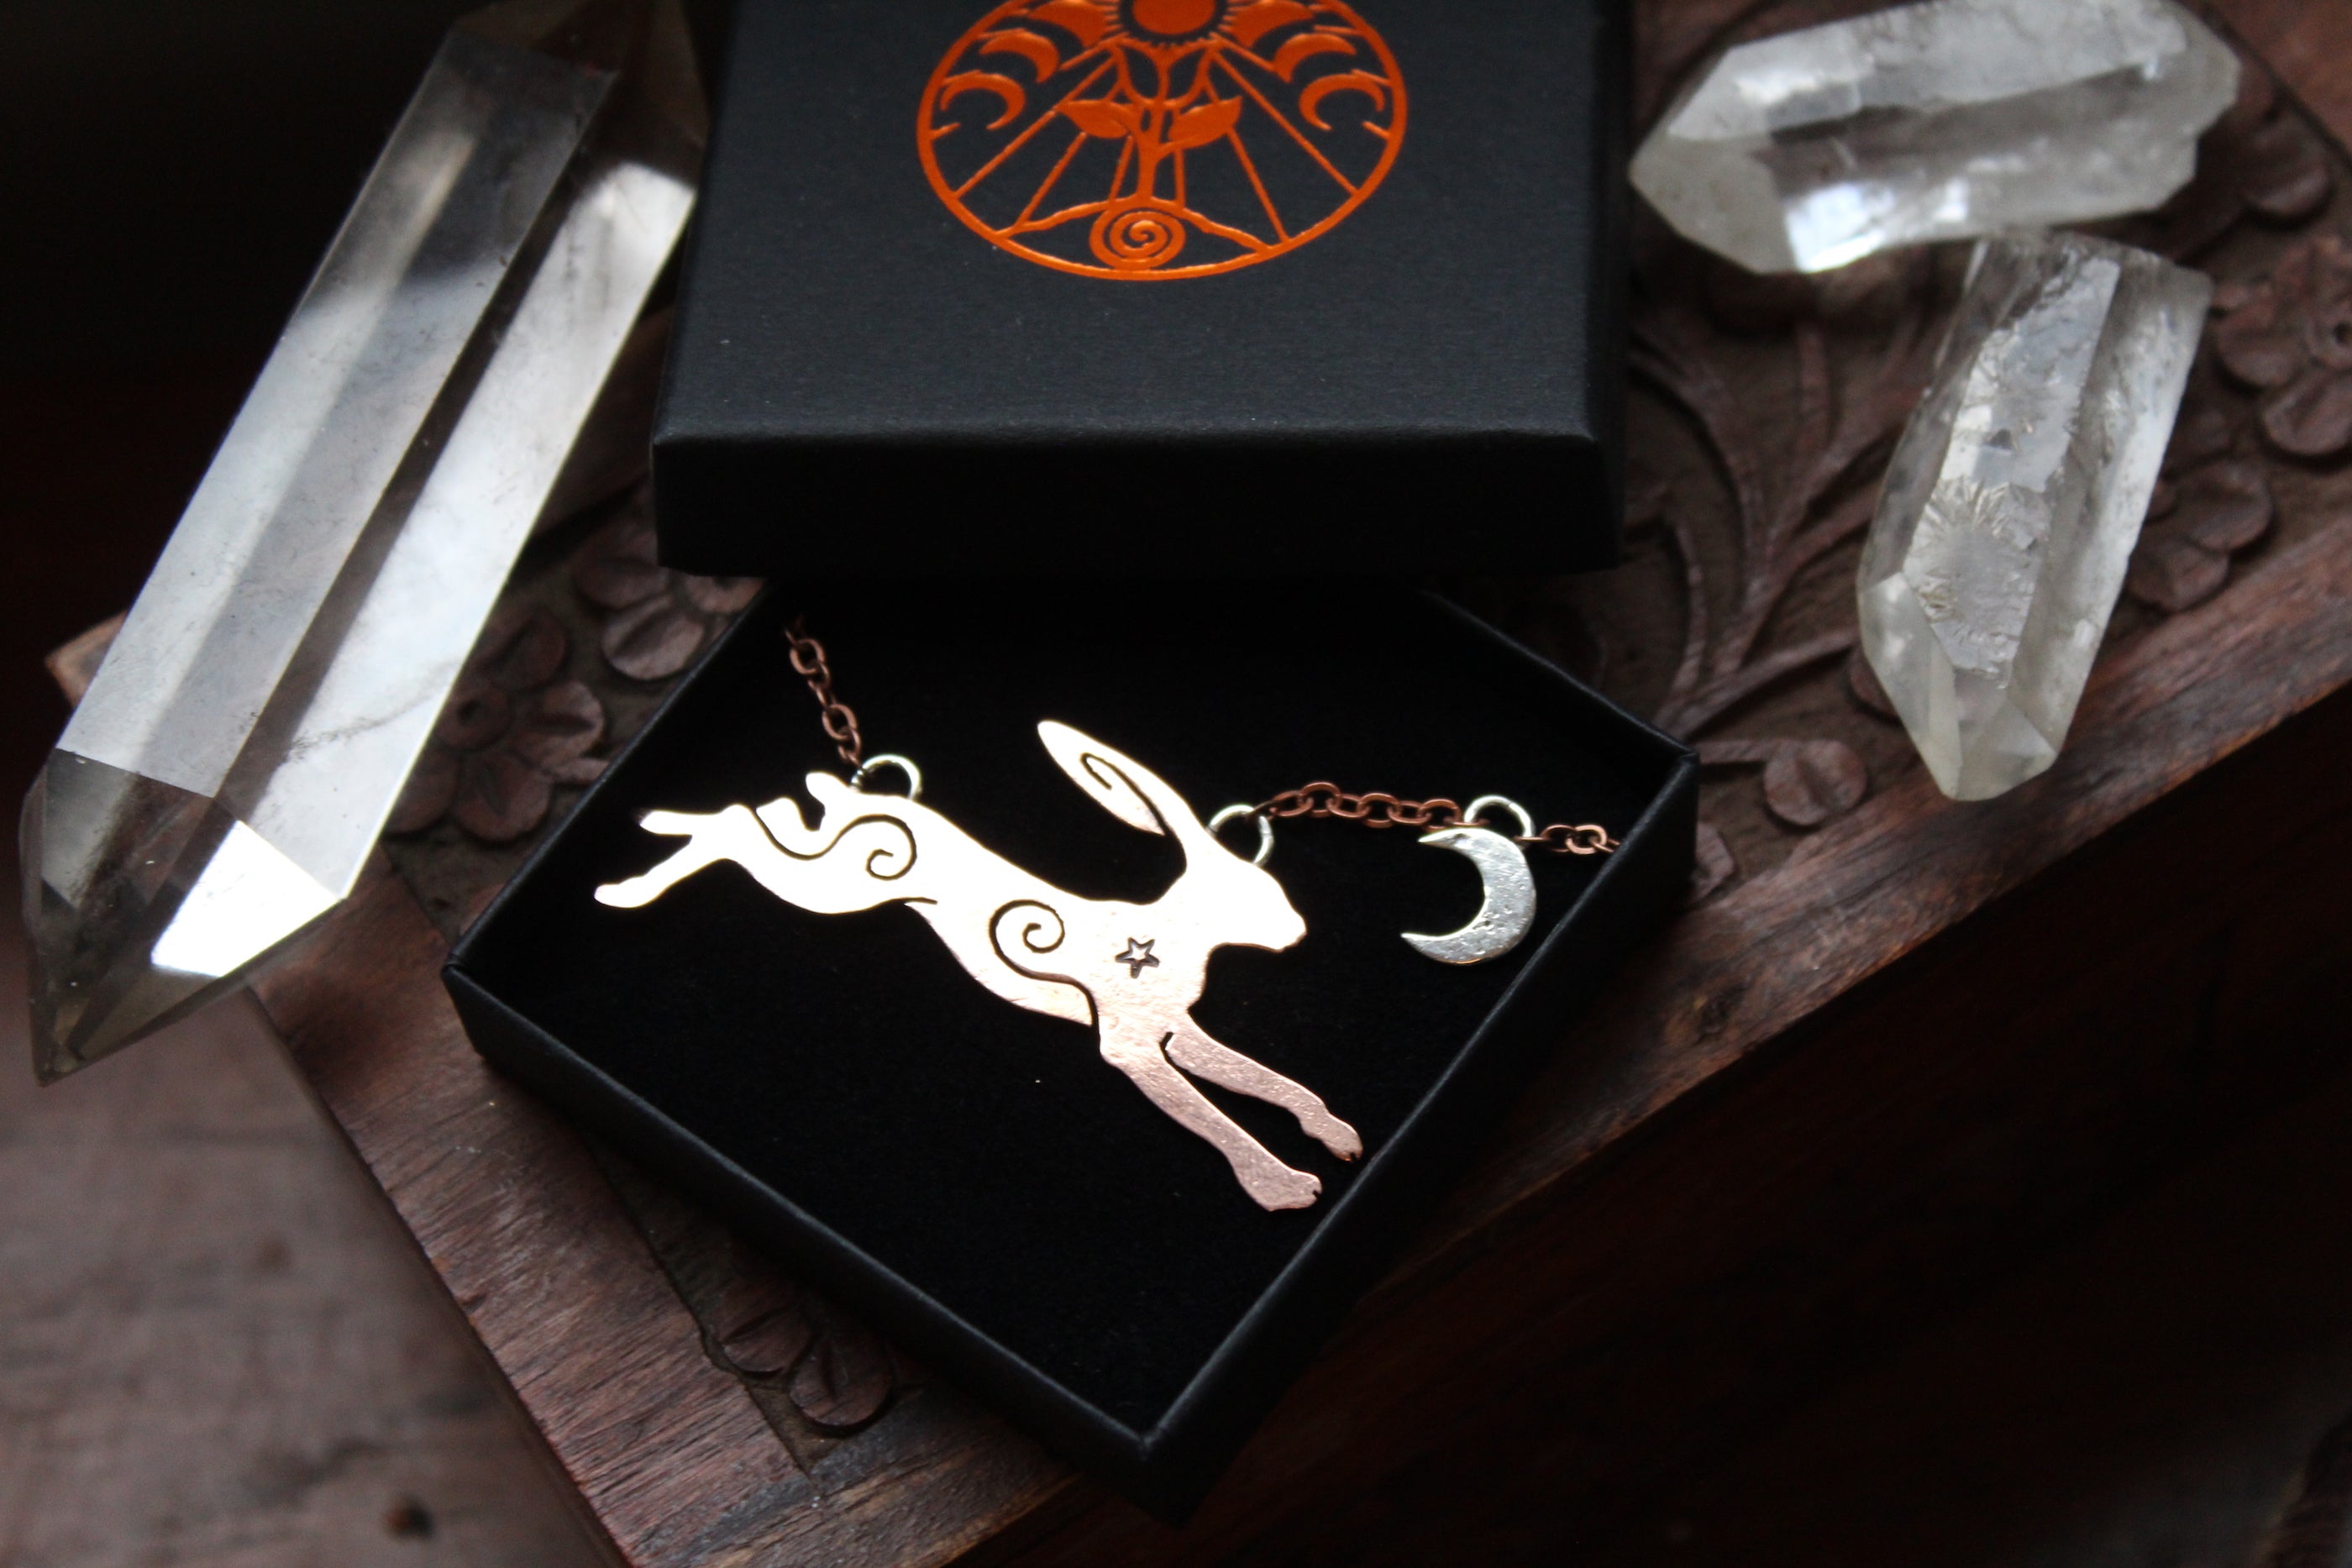 LEAPING LUNAR HARE Handmade Recycled Copper & Sterling Silver Necklace